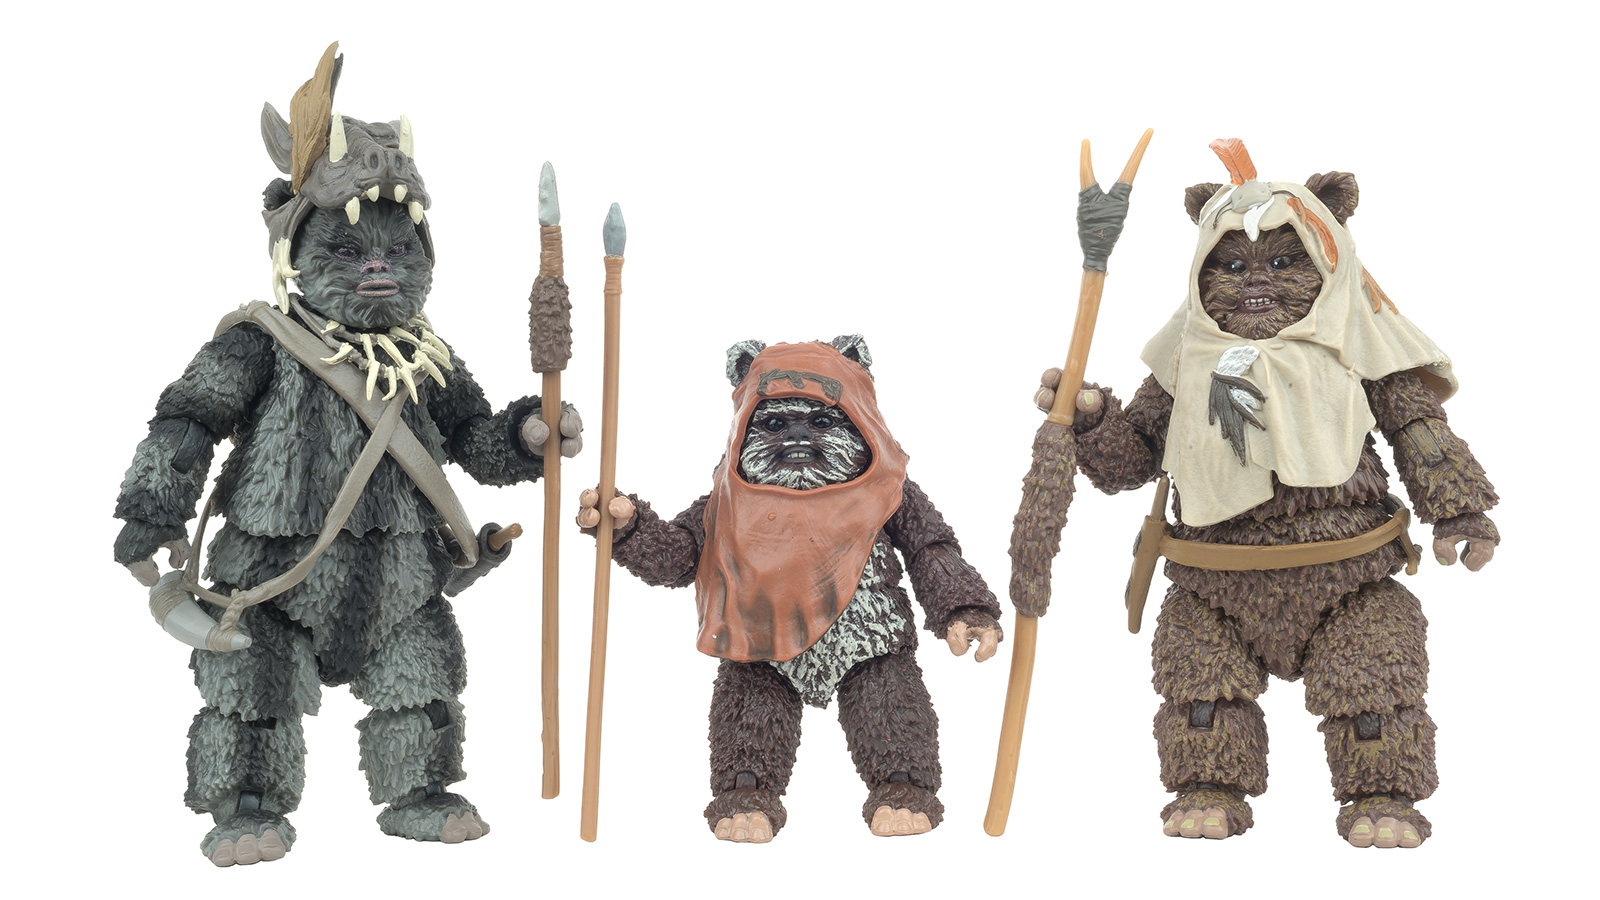 Do You Want More The Black Series 6-Inch Ewoks?